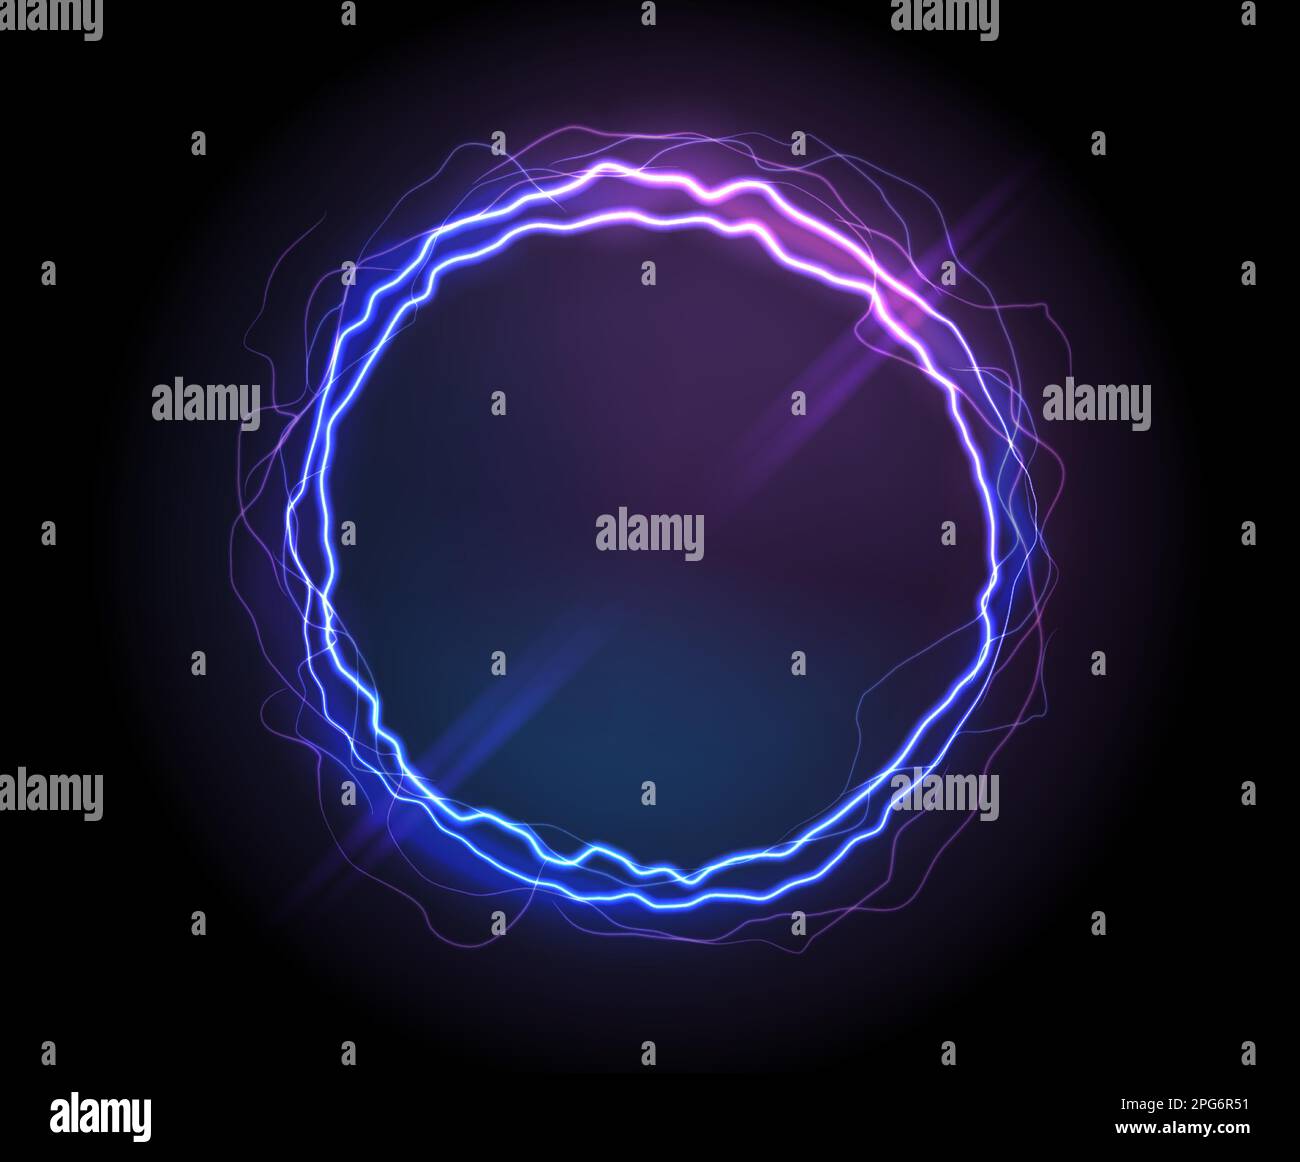 Electric circle or plasma round, realistic vector illustration. Abstractt round lightning frame with burning rays or powerful electric discharges isolated on black. Magical energy design element Stock Vector